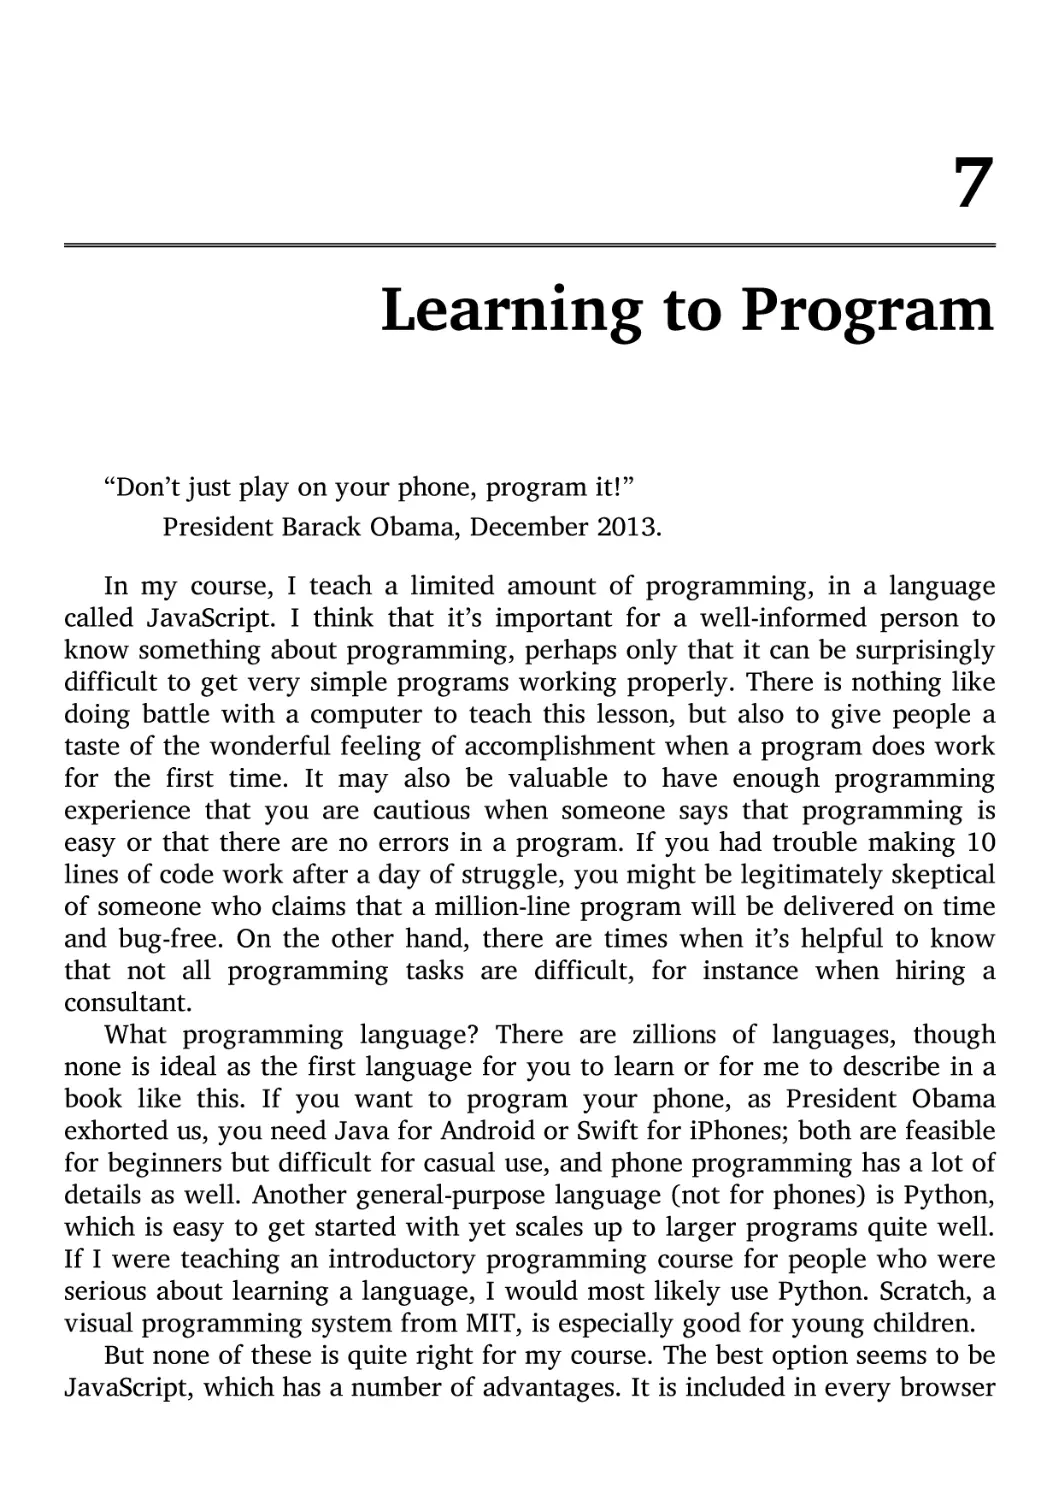 7. Learning to Program